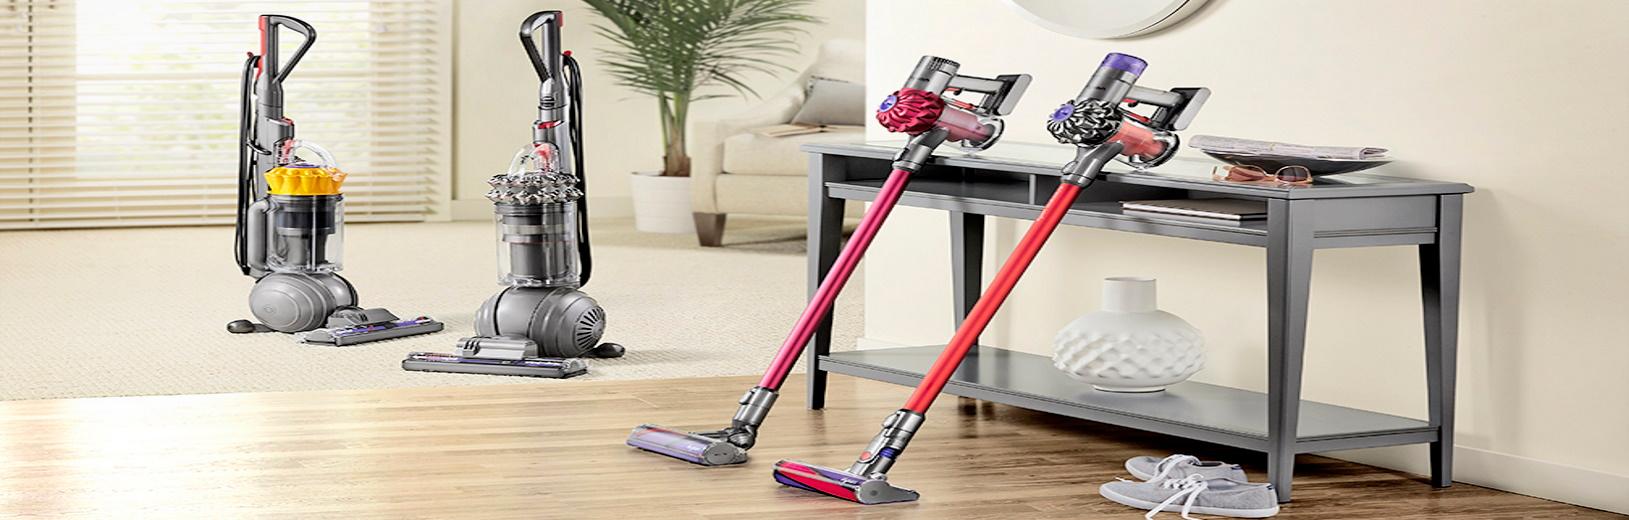 assorted dyson repairs